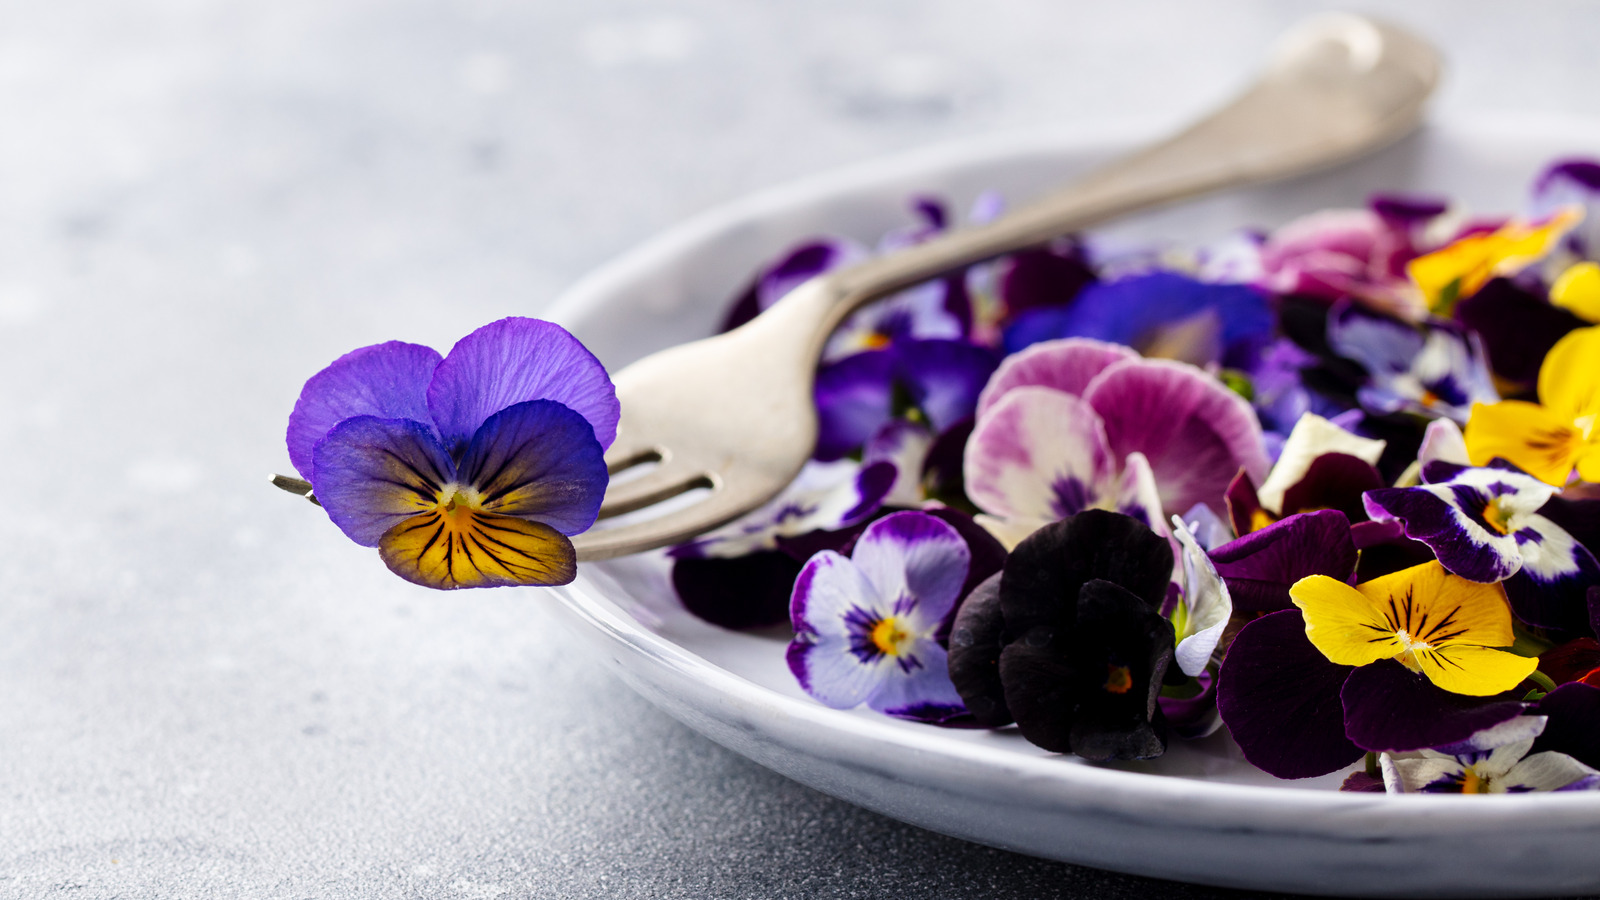 Edible Flowers List For Use in Cooking and Garnishing